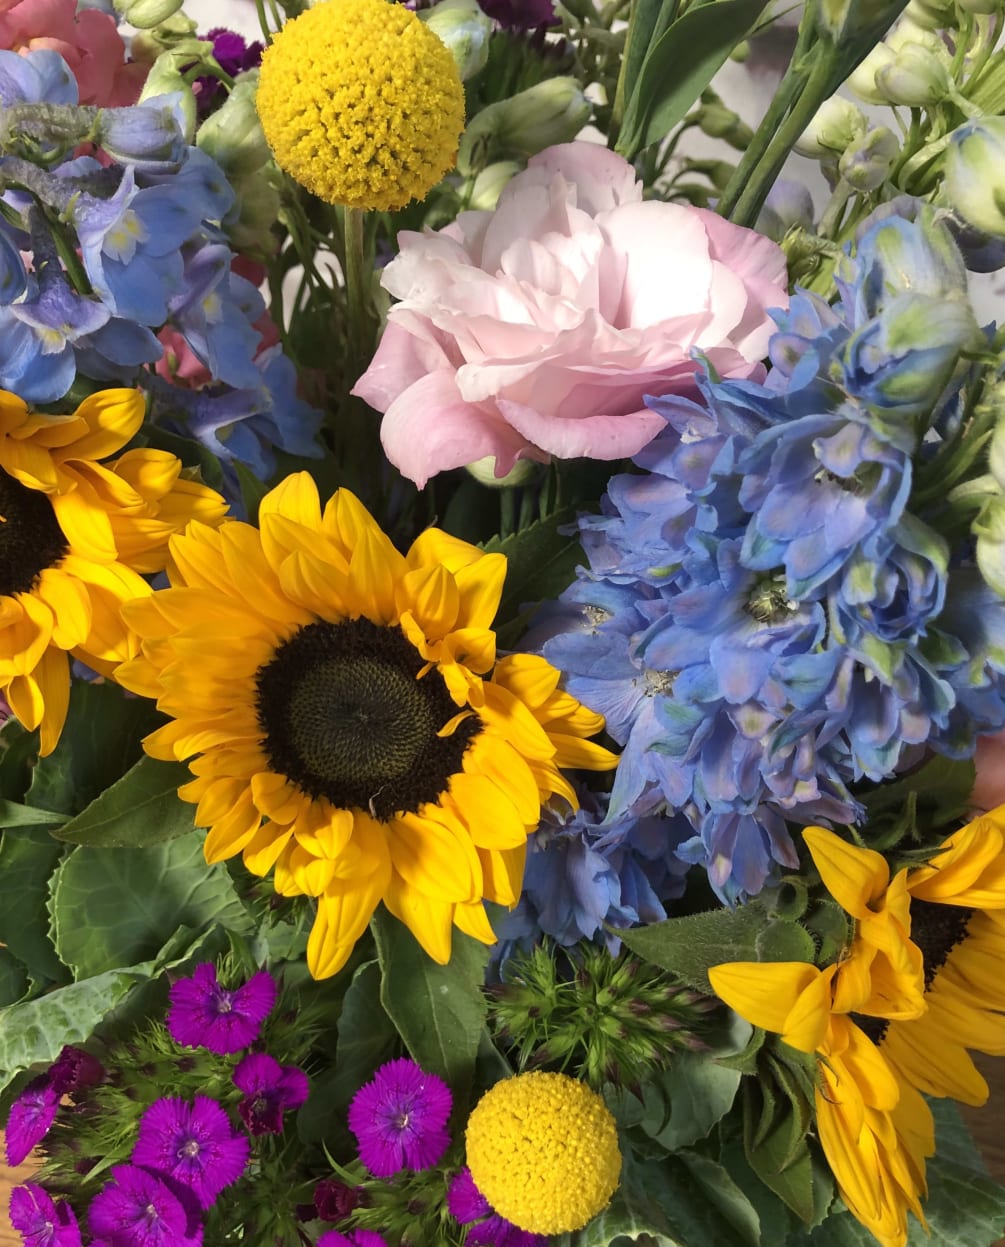 Buy local! Assortment of seasonal flowers from local Somis farm. Some of